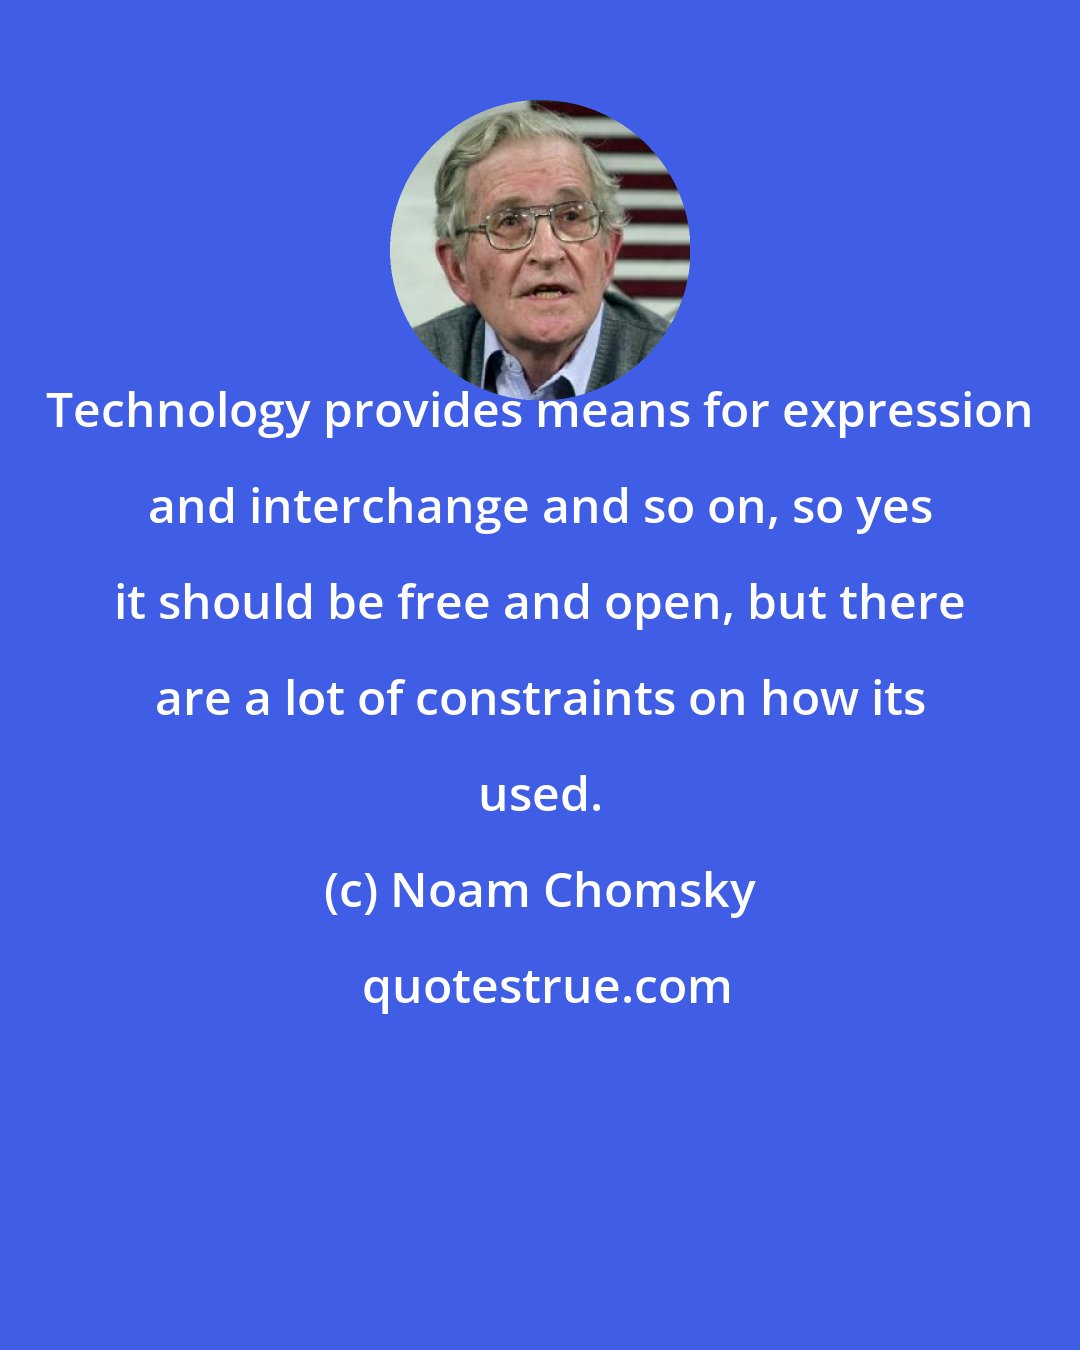 Noam Chomsky: Technology provides means for expression and interchange and so on, so yes it should be free and open, but there are a lot of constraints on how its used.